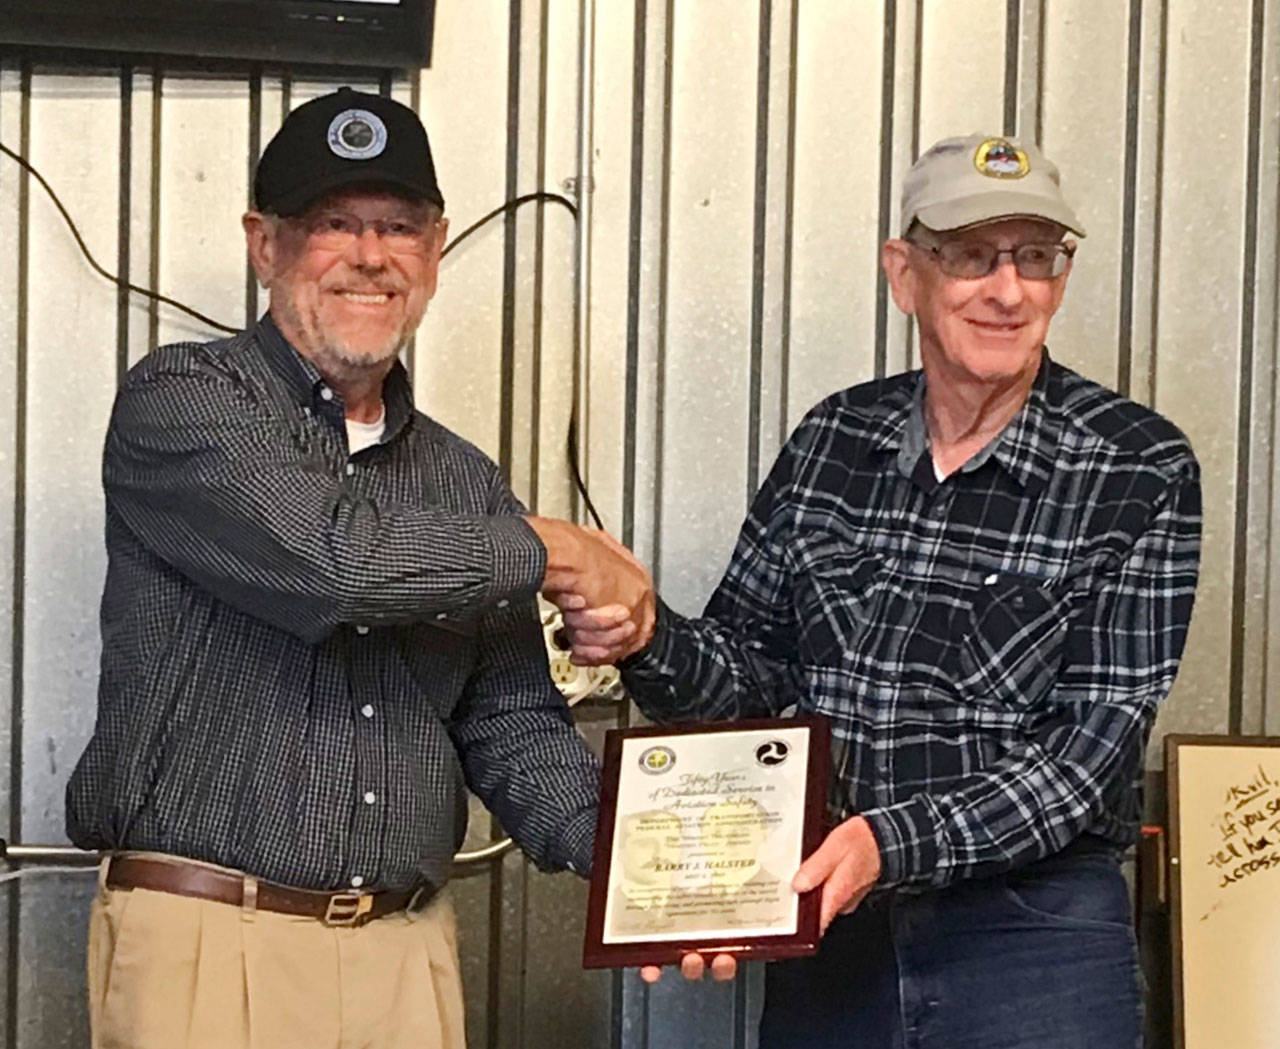 Barry J. Halsted, right, receives the Wright Brothers Master Pilot Award from Ray Ballantyne, representing the FAA Northwest Mountain Flight Standards Division, at the Sequim Valley EAA Chapter 430 monthly gathering on July 27. Submitted photo